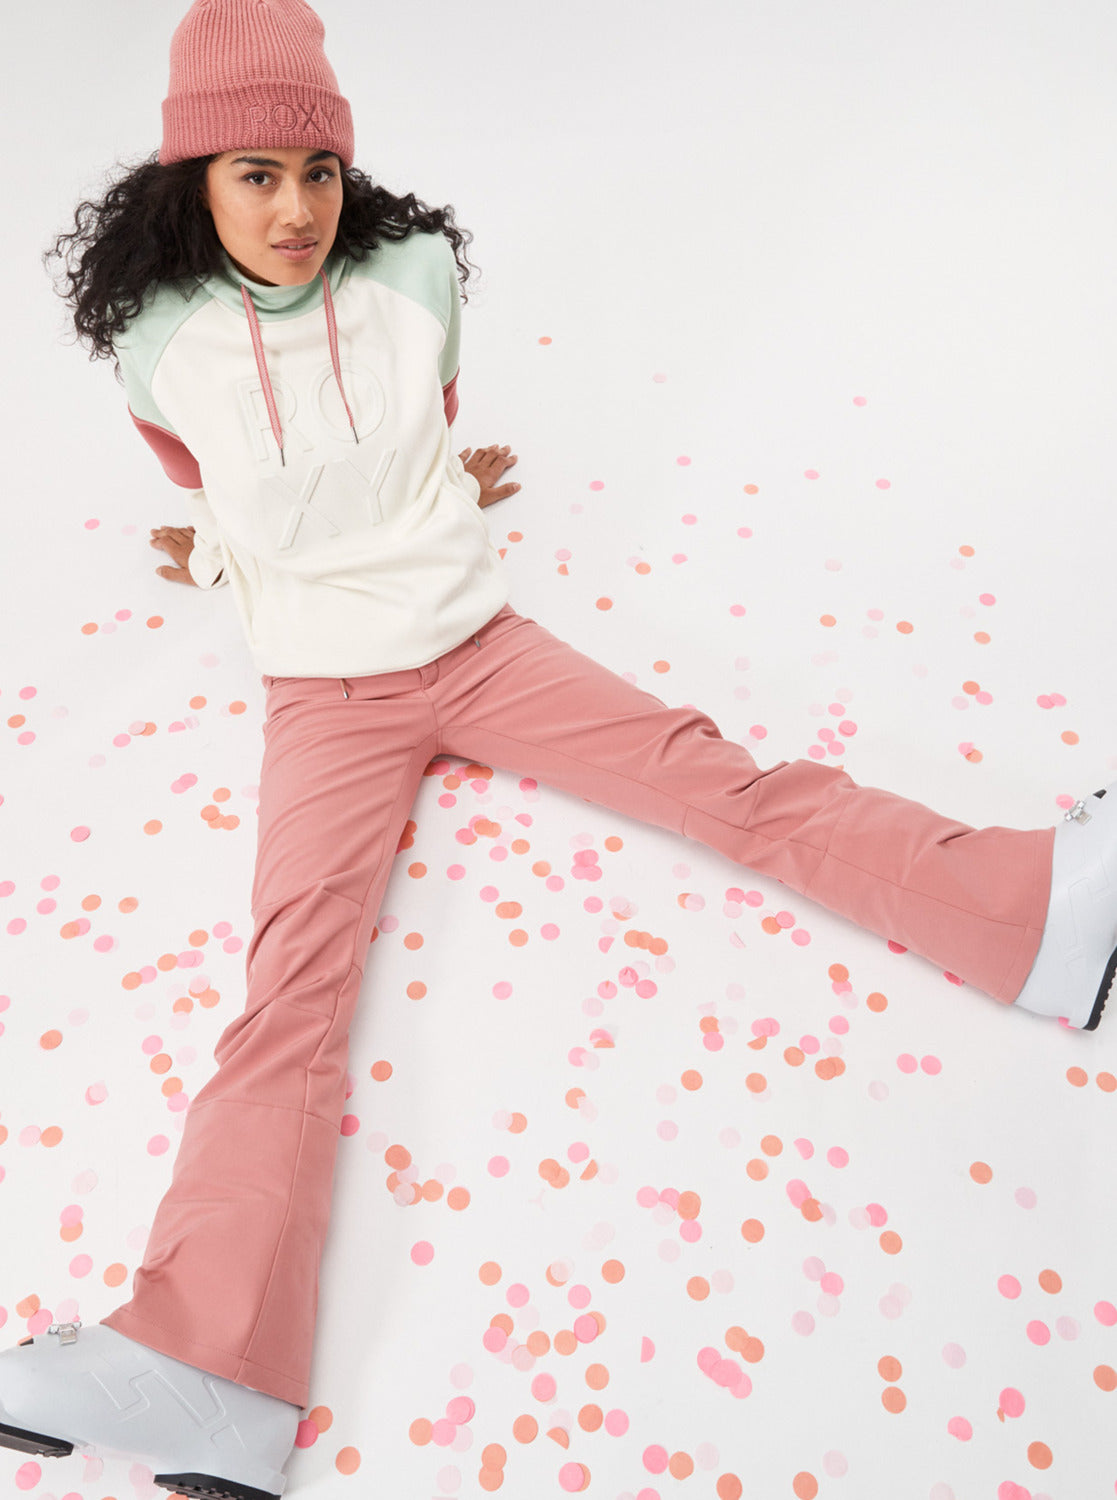 Rising High Technical Snow Pants - Dusty Rose